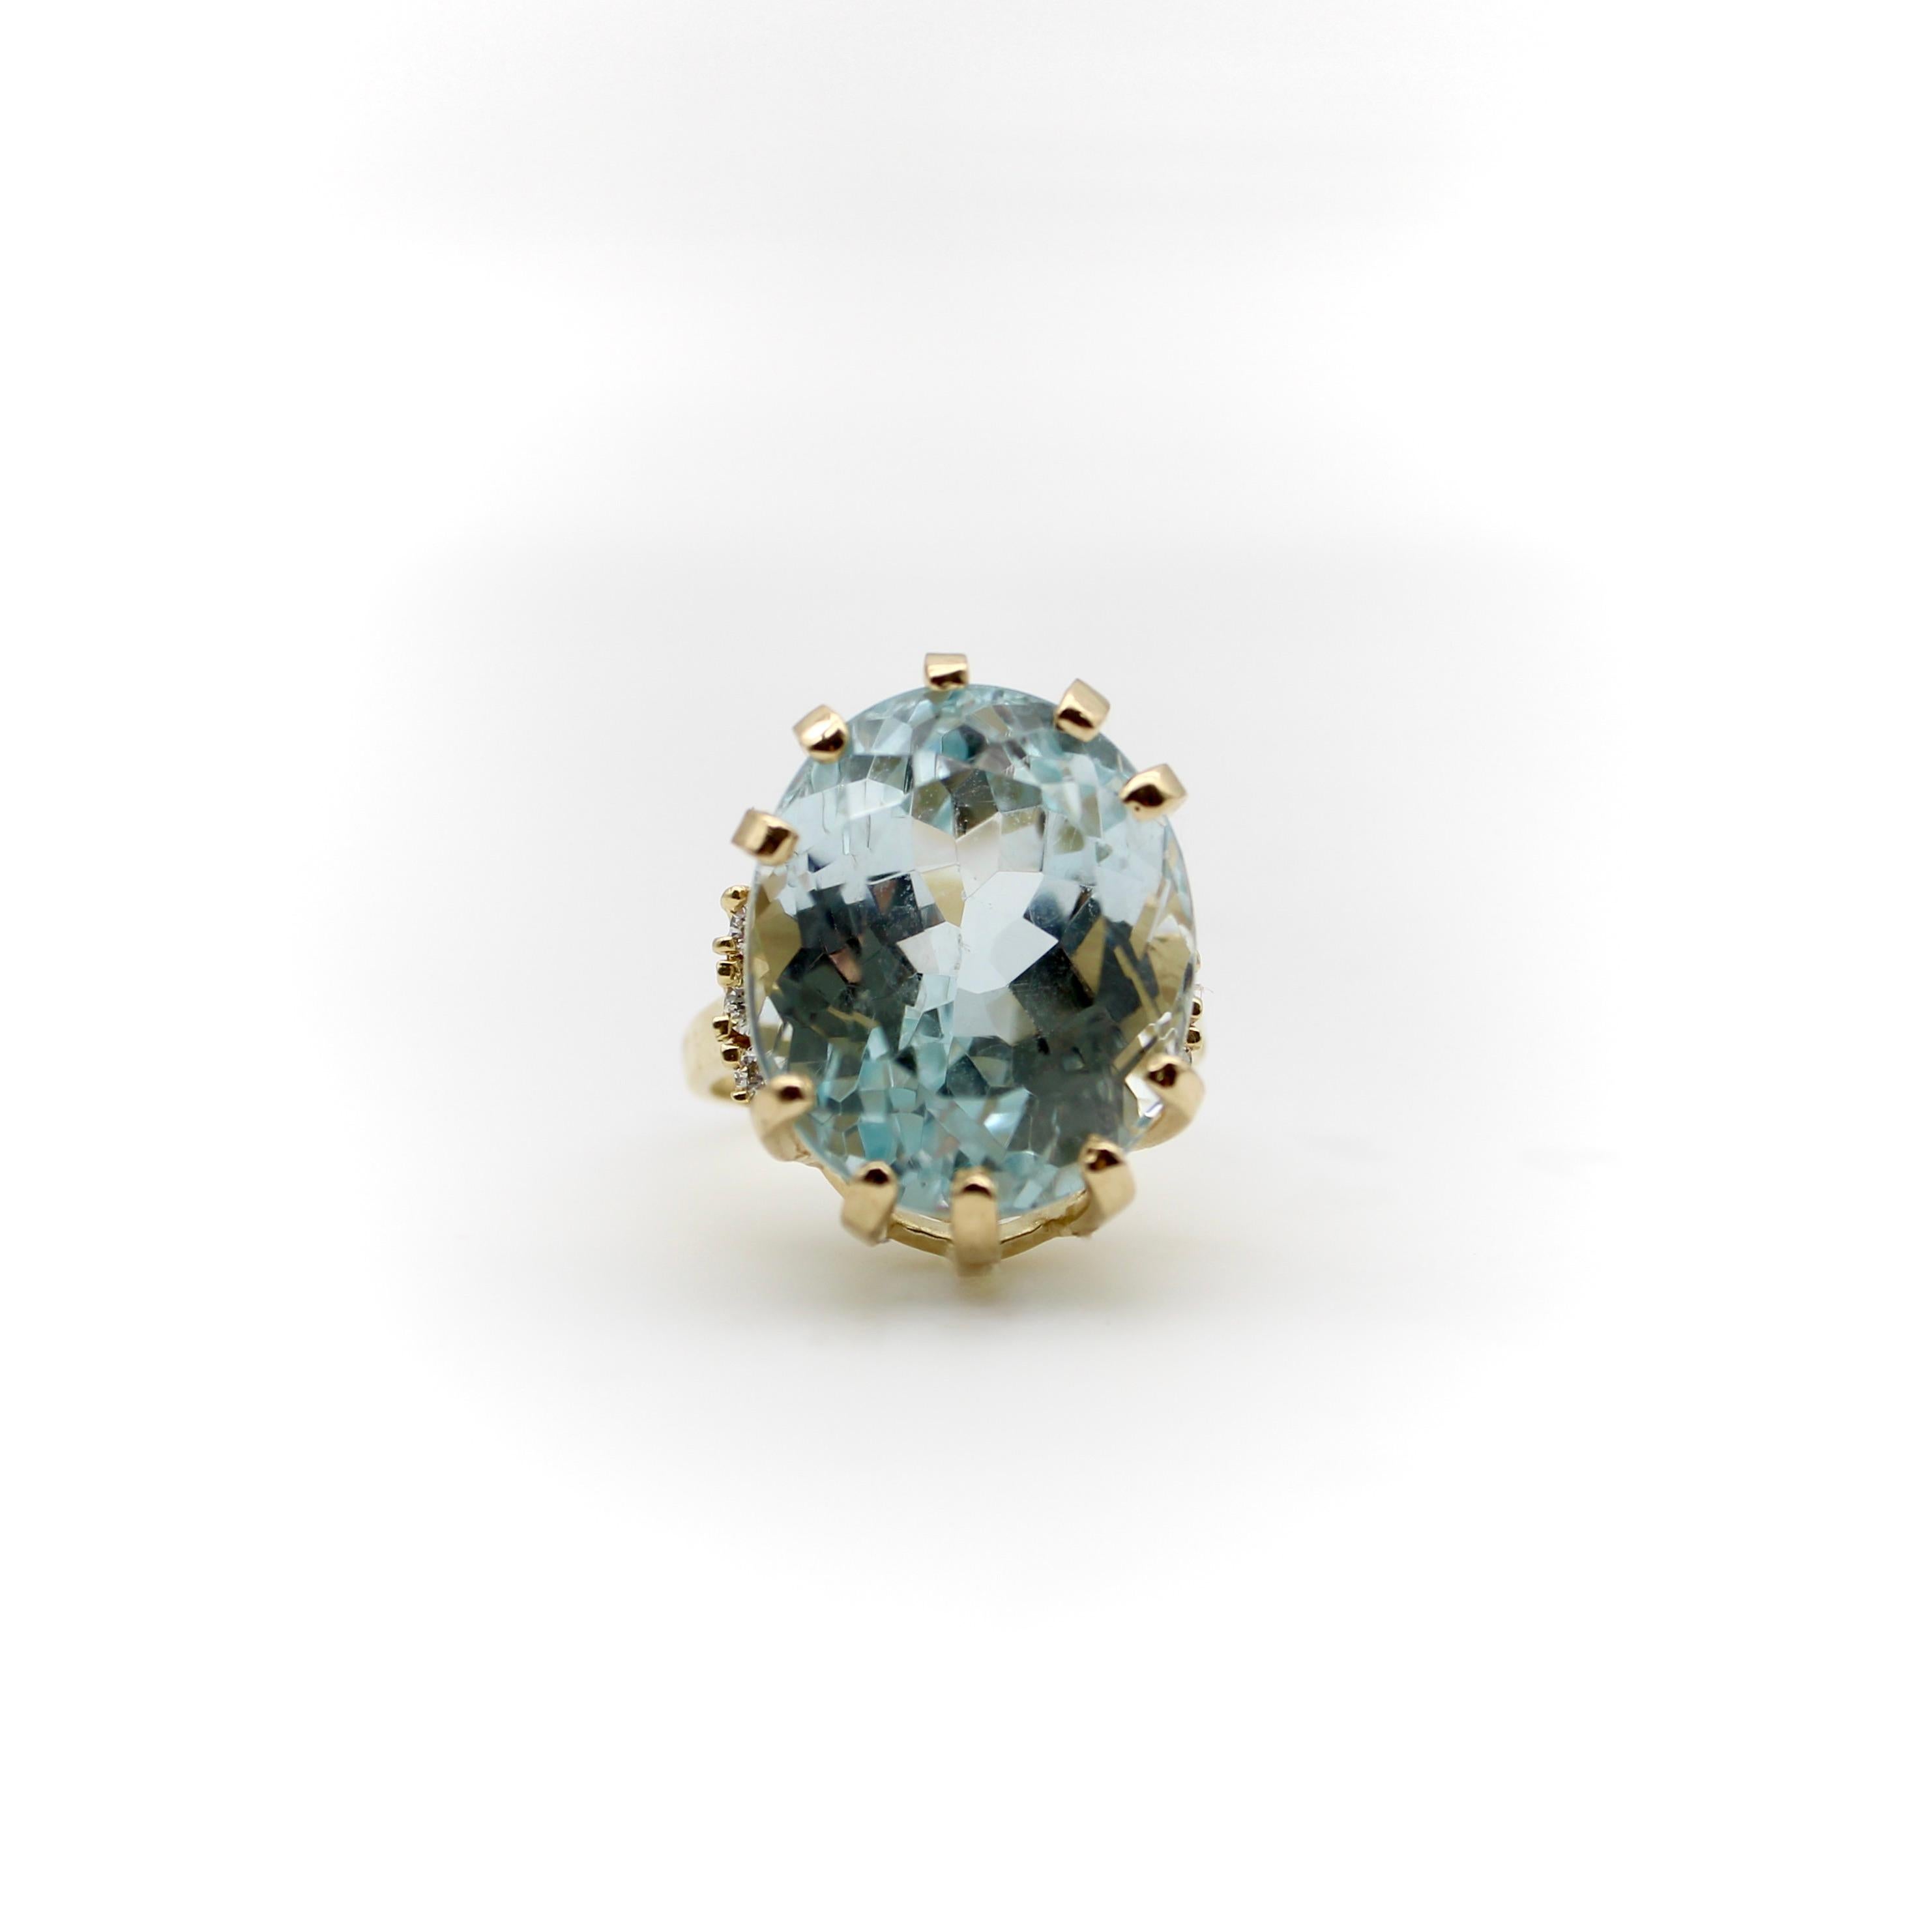 The stunning ice blue aquamarine stone in this ring is a large mixed oval cut, deep with many facets that can be admired while looking into the ring. The depth of the stone creates a beautiful cocktail ring with elegant height. The 14k gold setting